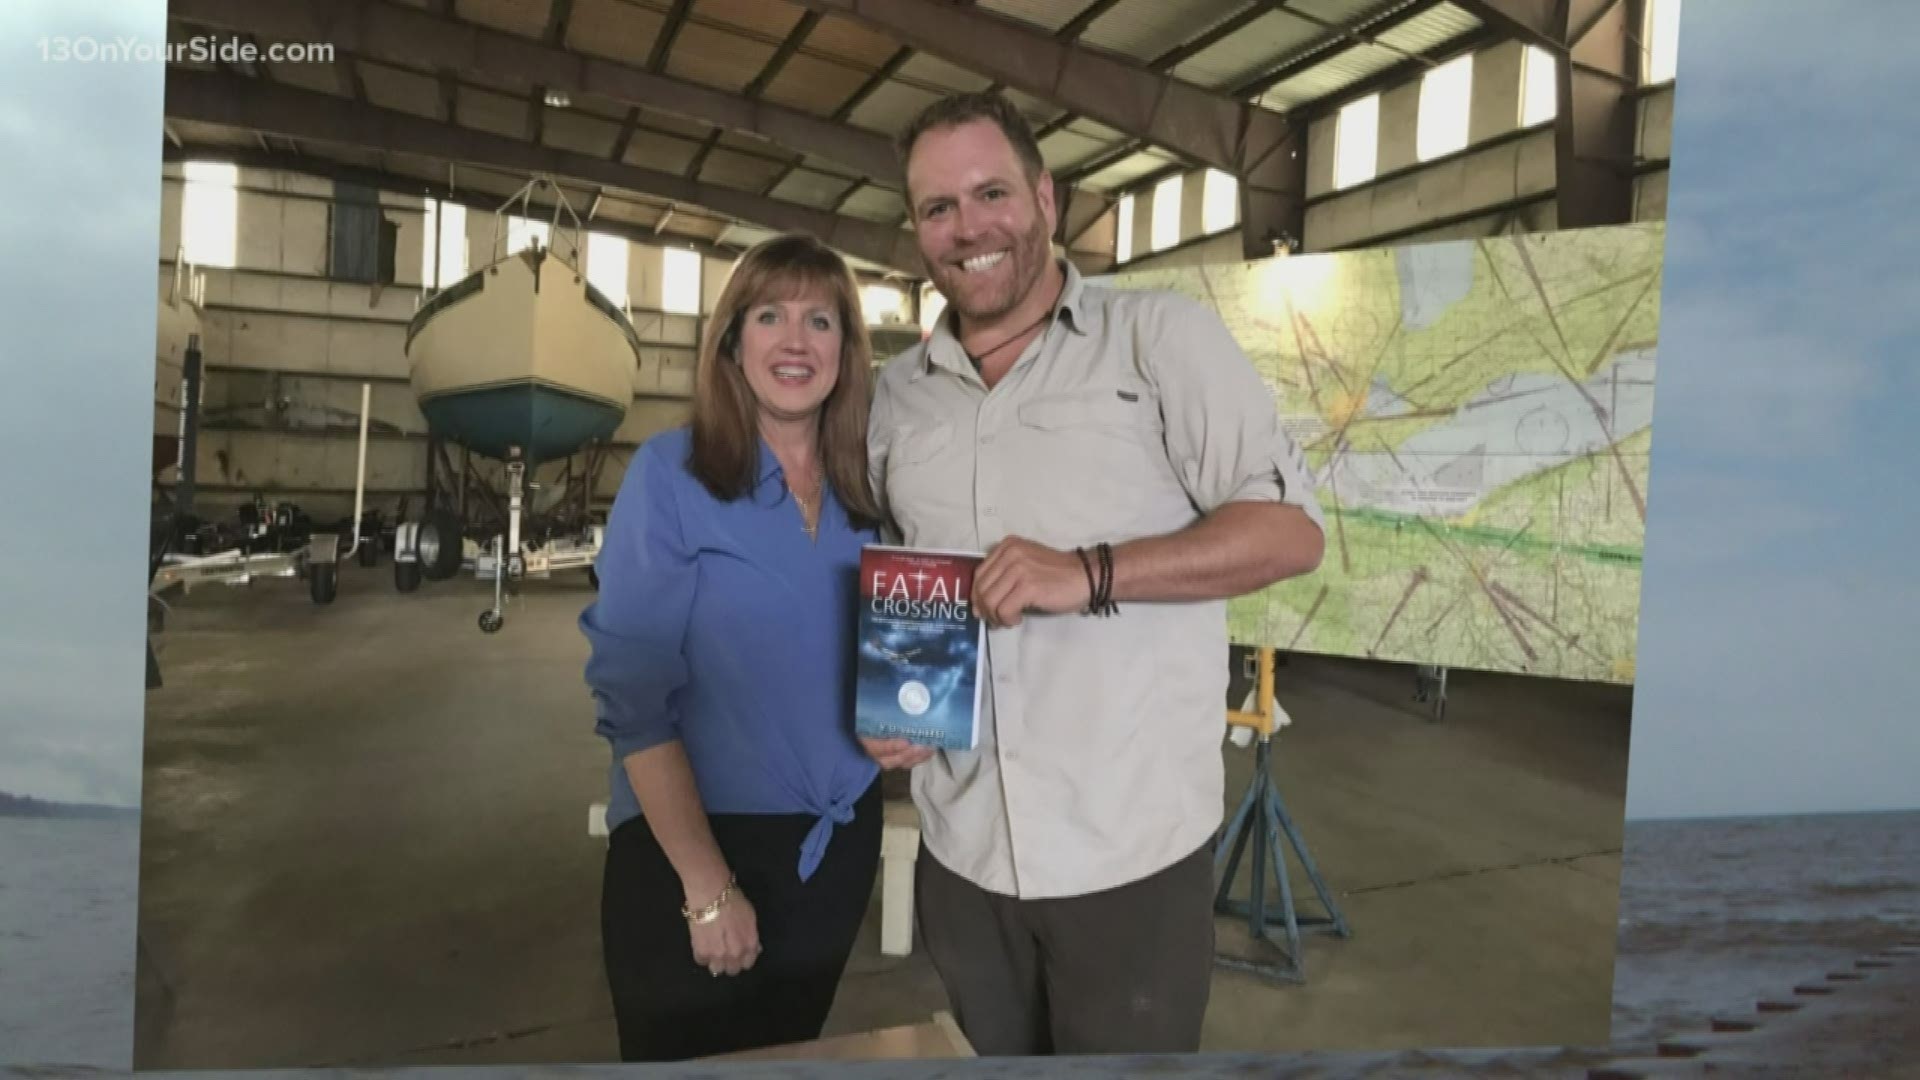 Valerie van Heest explains why Josh Gates from "Expedition Unknown" visited West Michigan.